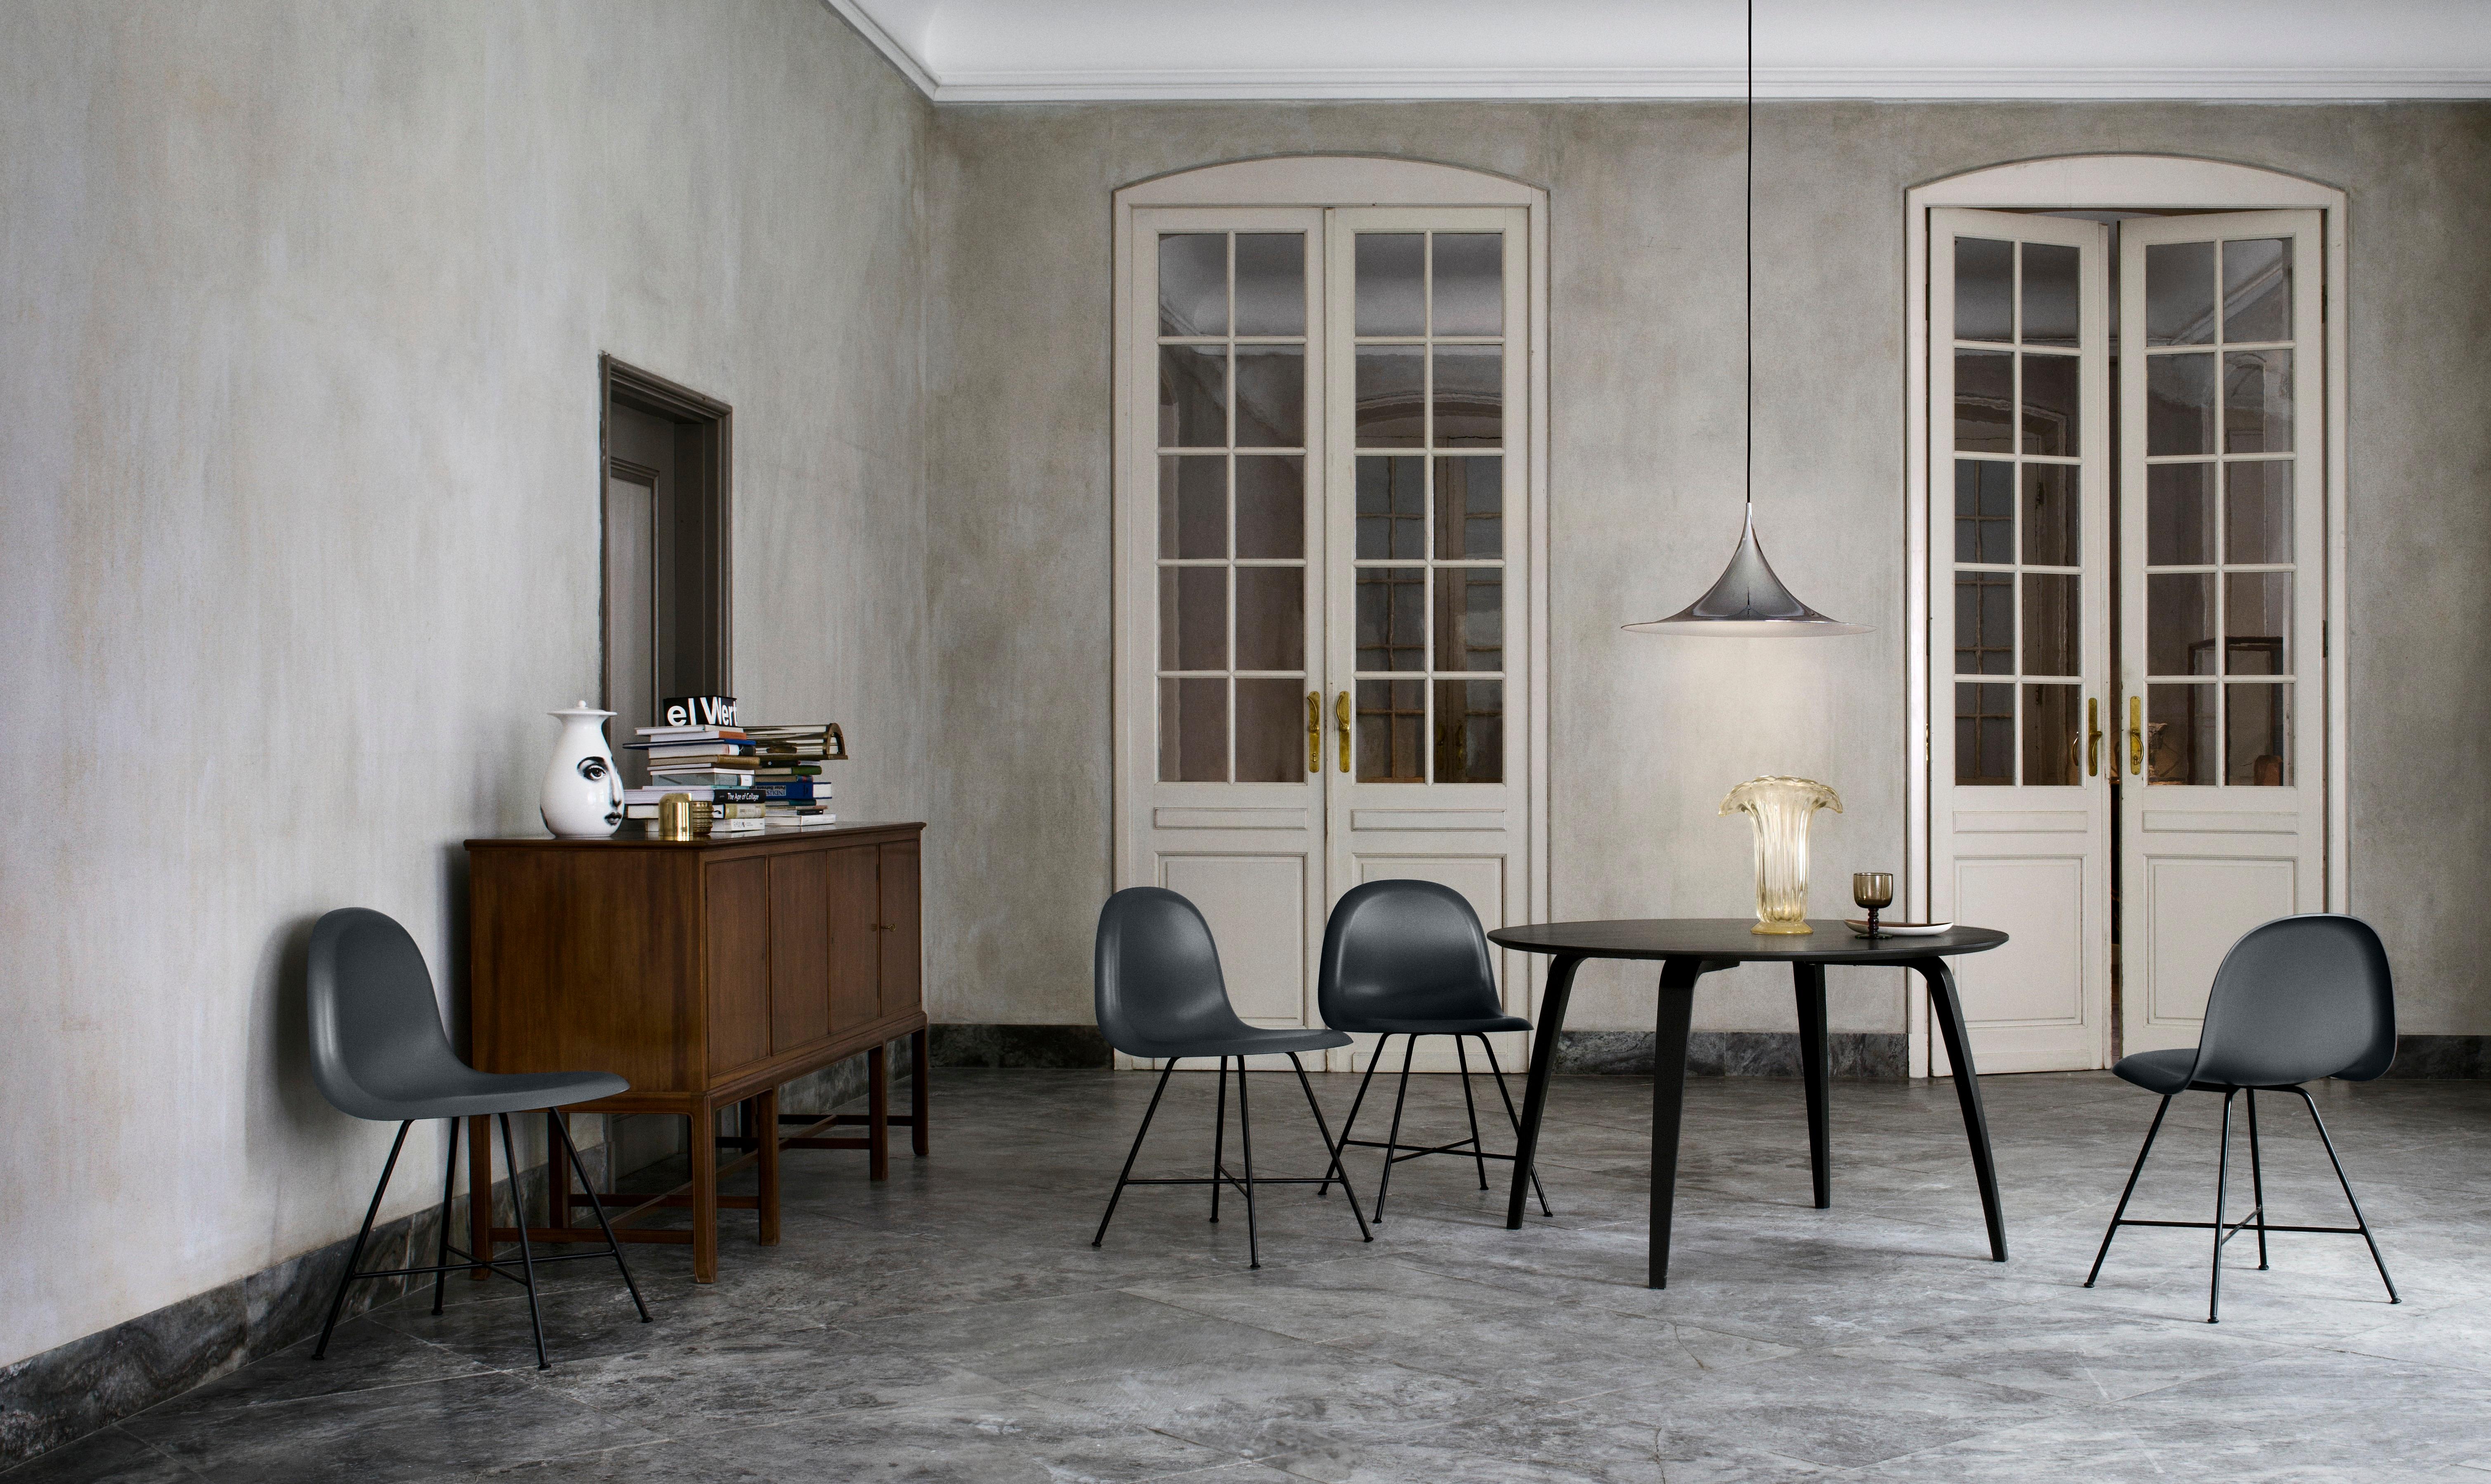 Bonderup And Thorup 'Semi' Pendant in Anthracite Gray.

Designed in 1968 by Claus Bonderup and Torsten Thorup, this authorized re-edition by GUBI of Denmark meticulously reproduces their work with great attention to detail and materials faithful